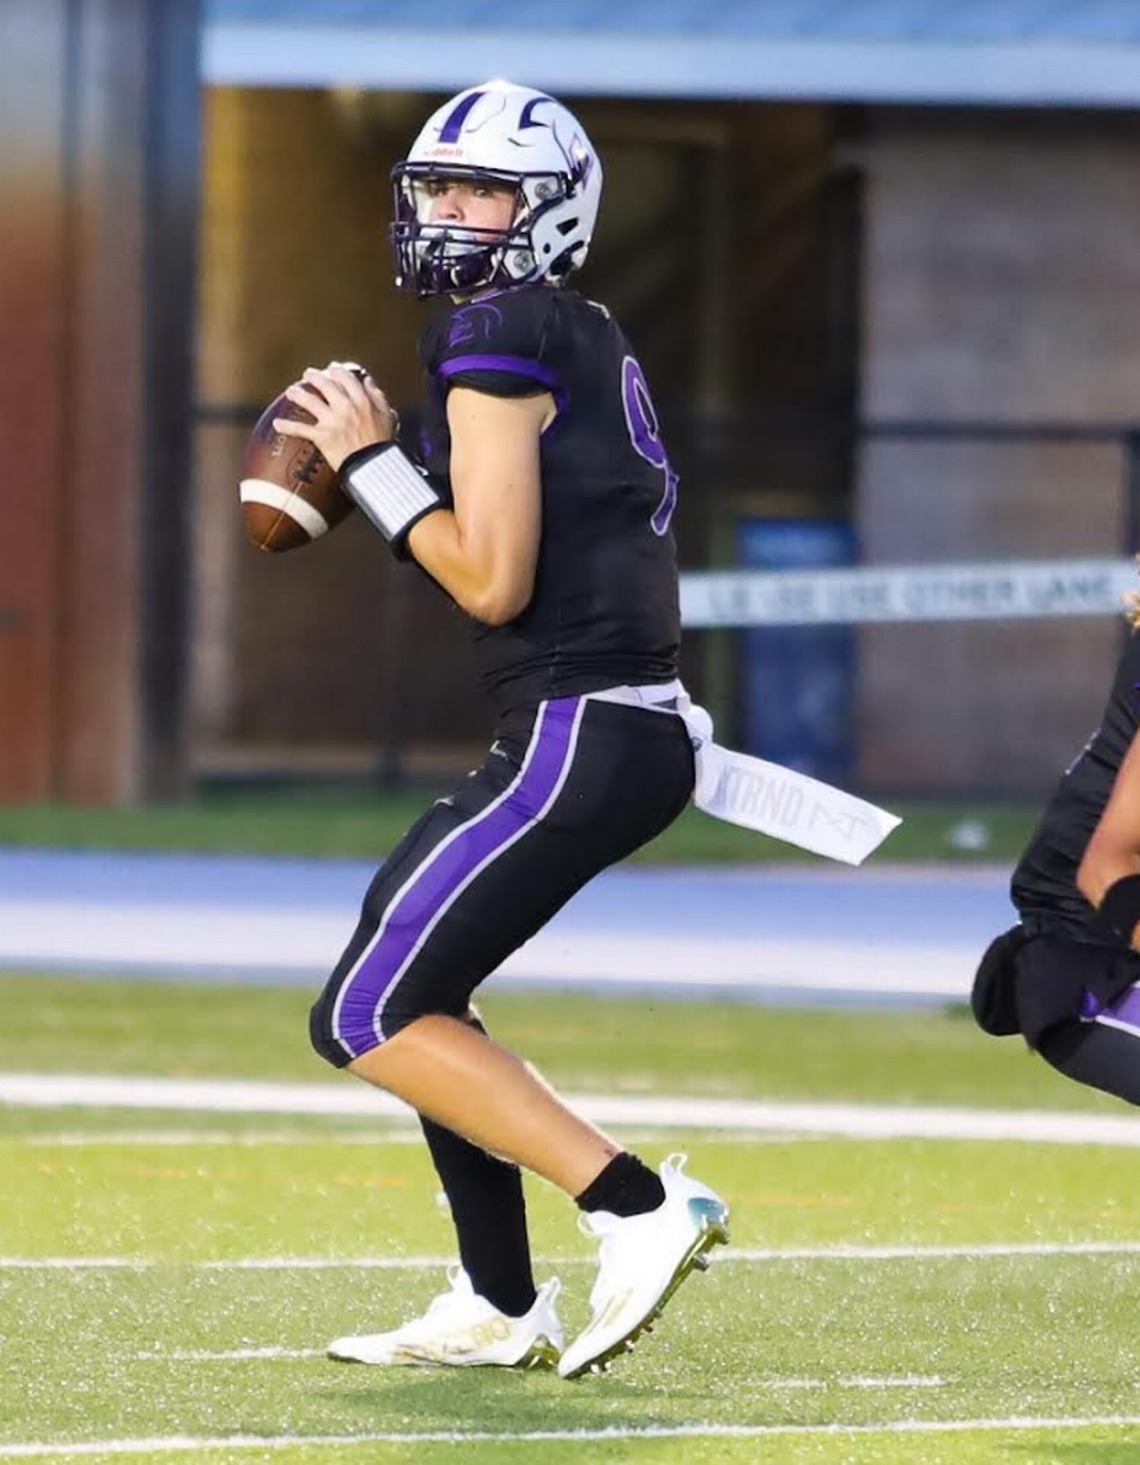 True North QB Zac Katz was invited to compete in the Under Armour Next All American Football Game.